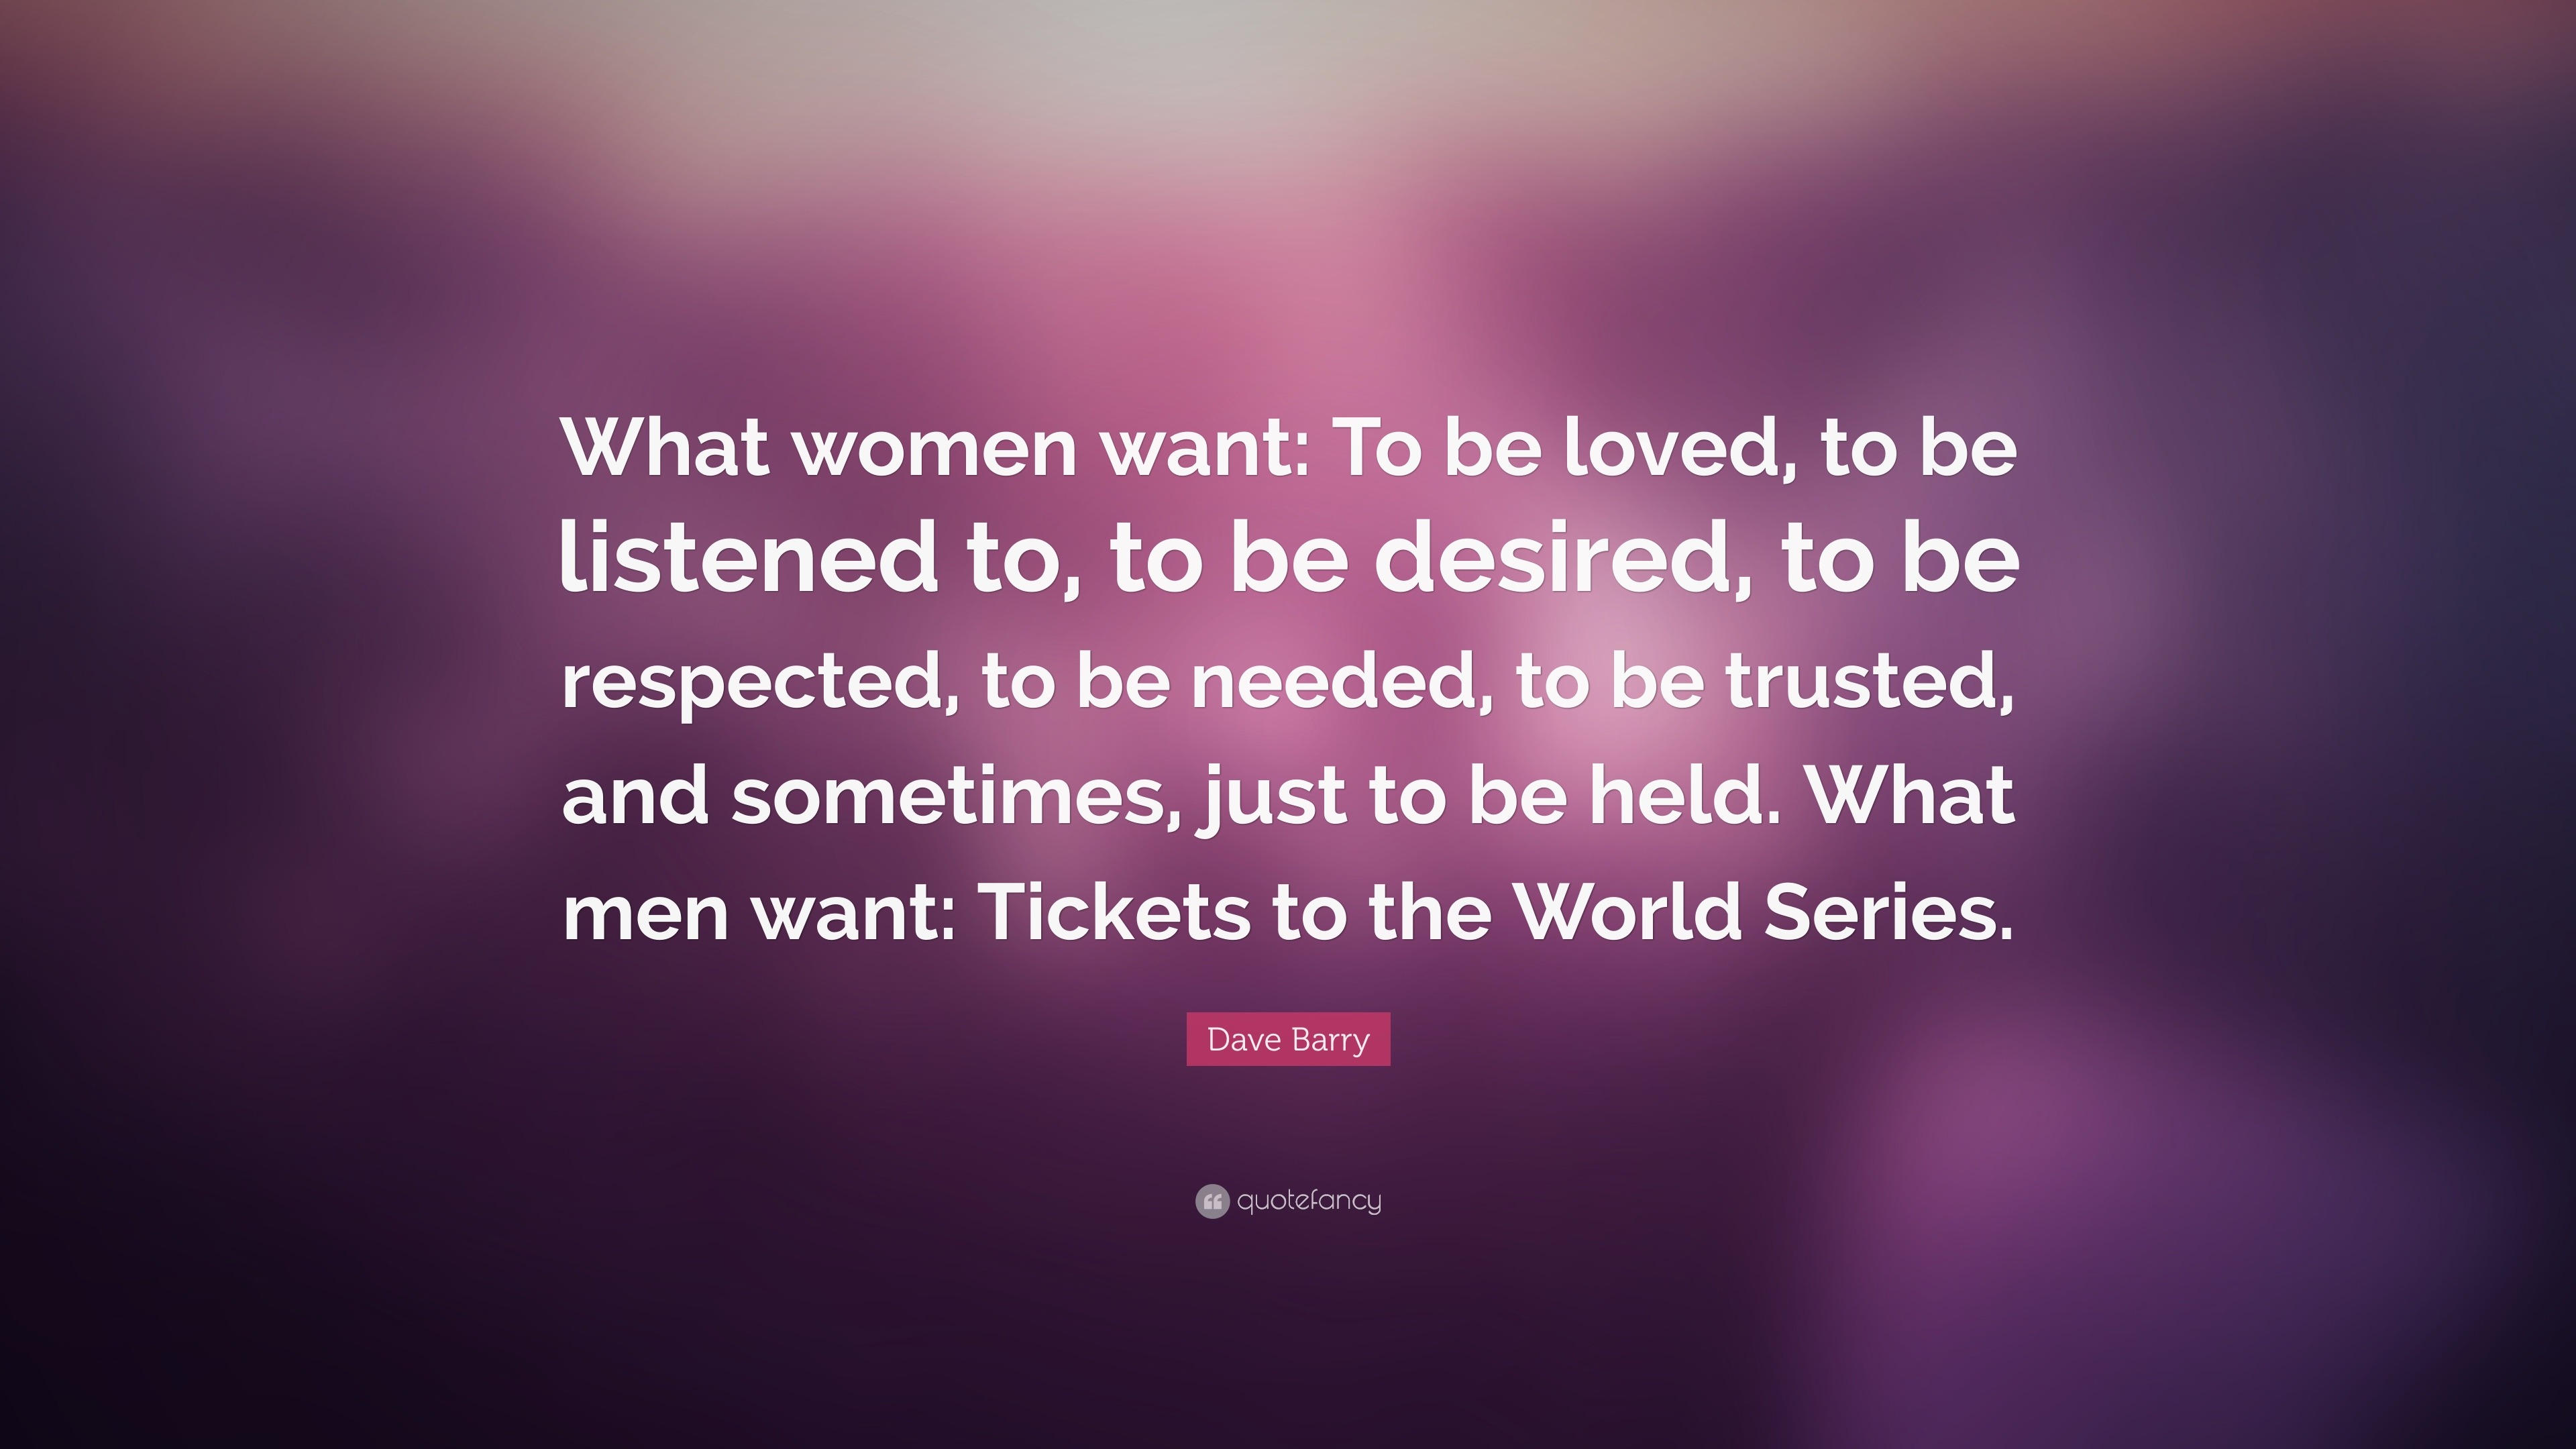 https://quotefancy.com/media/wallpaper/3840x2160/280700-Dave-Barry-Quote-What-women-want-To-be-loved-to-be-listened-to-to.jpg